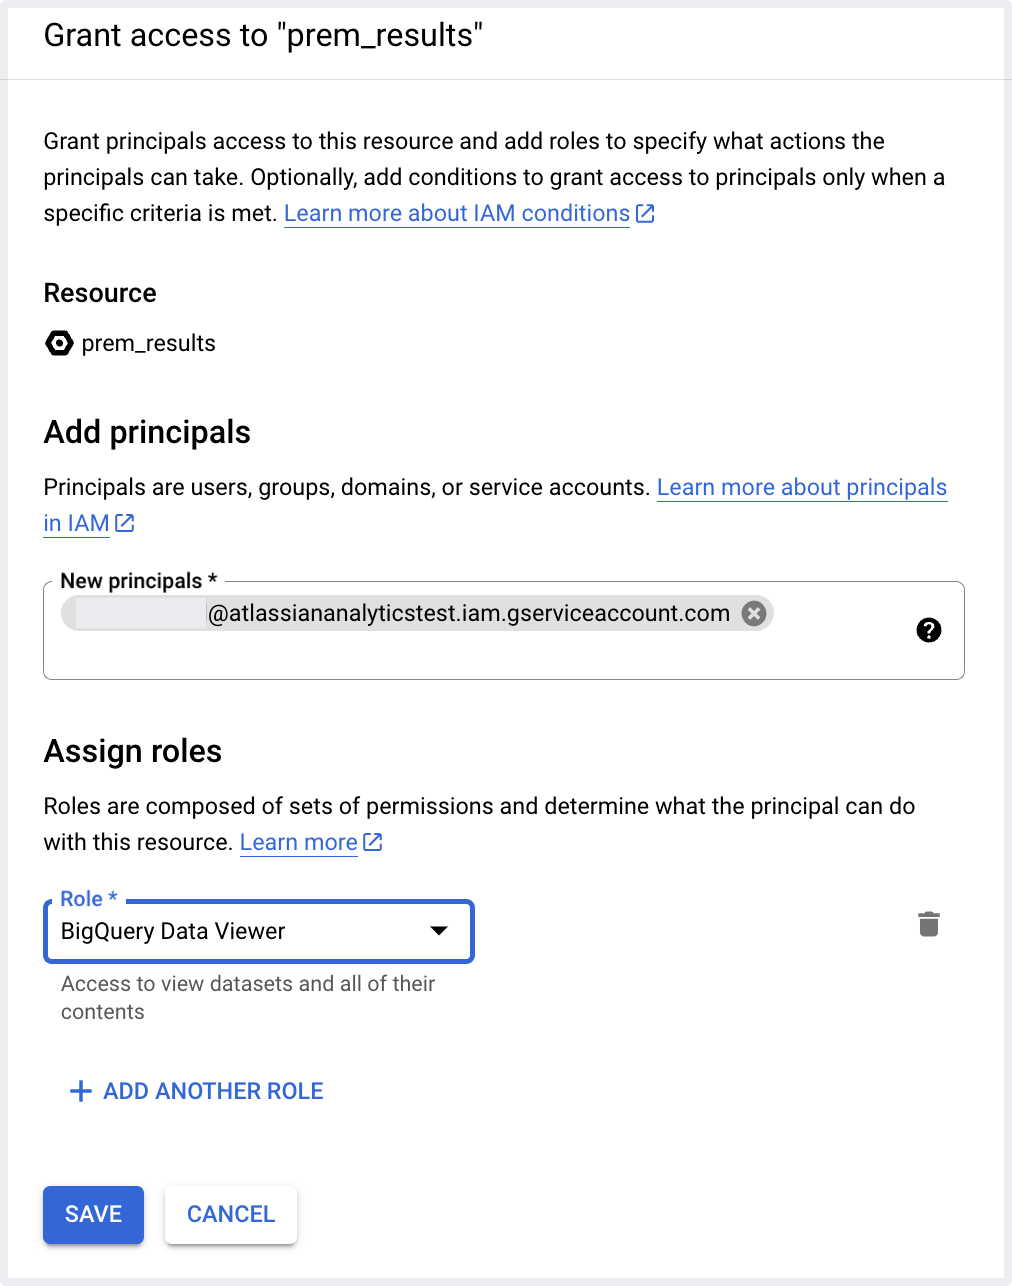 Assigning "BigQuery Data Viewer" role to new principal